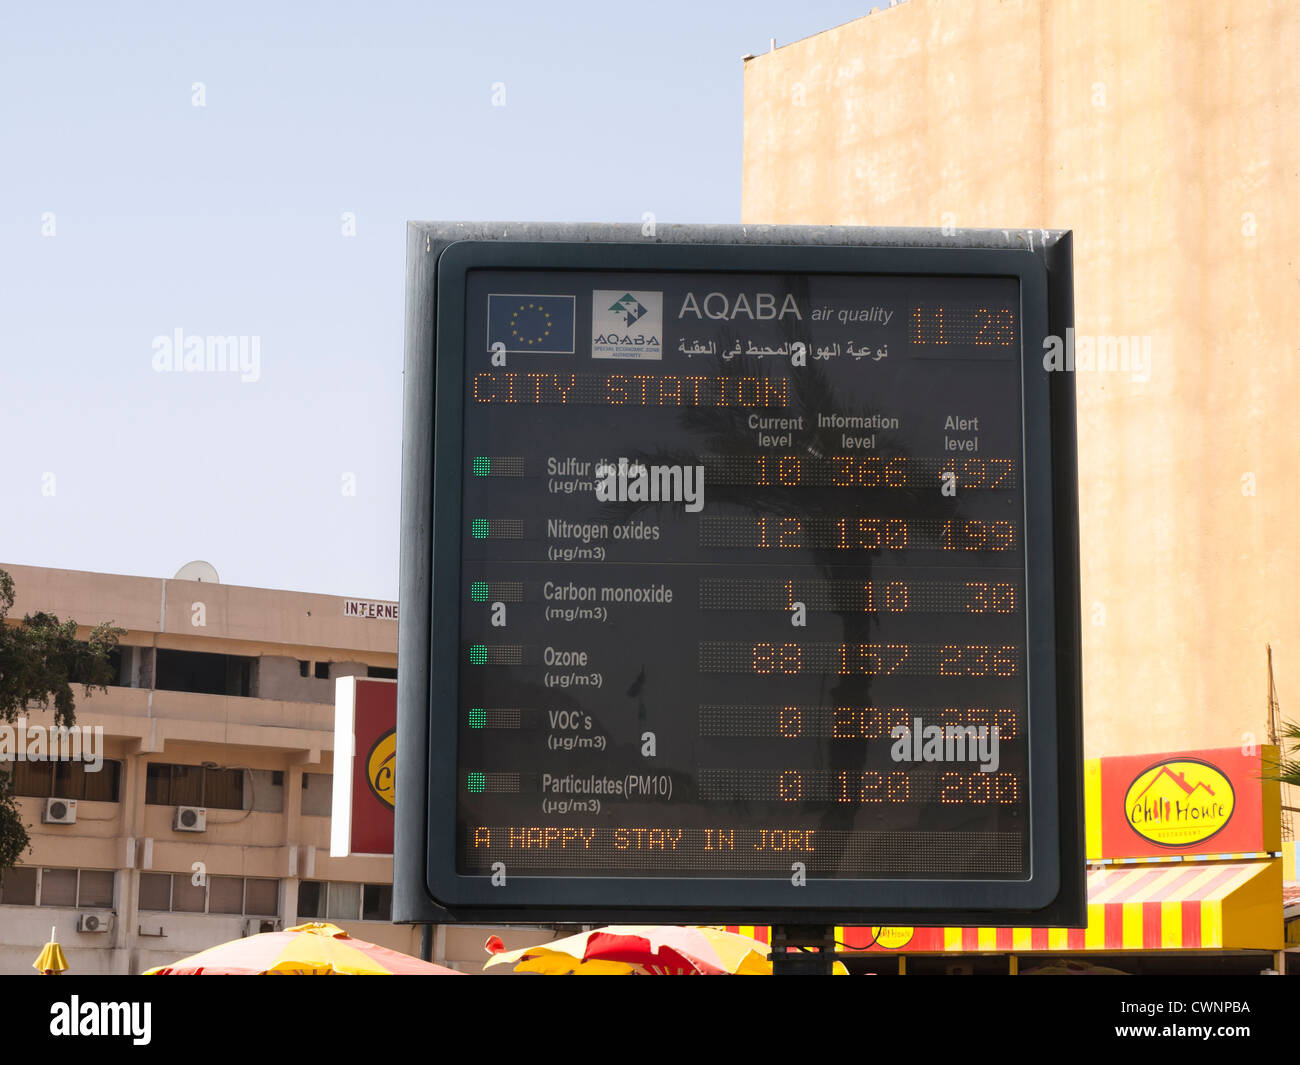 Sign showing updated data on air pollution in the tourist resort of Aqaba in Jordan. All green lights. Stock Photo